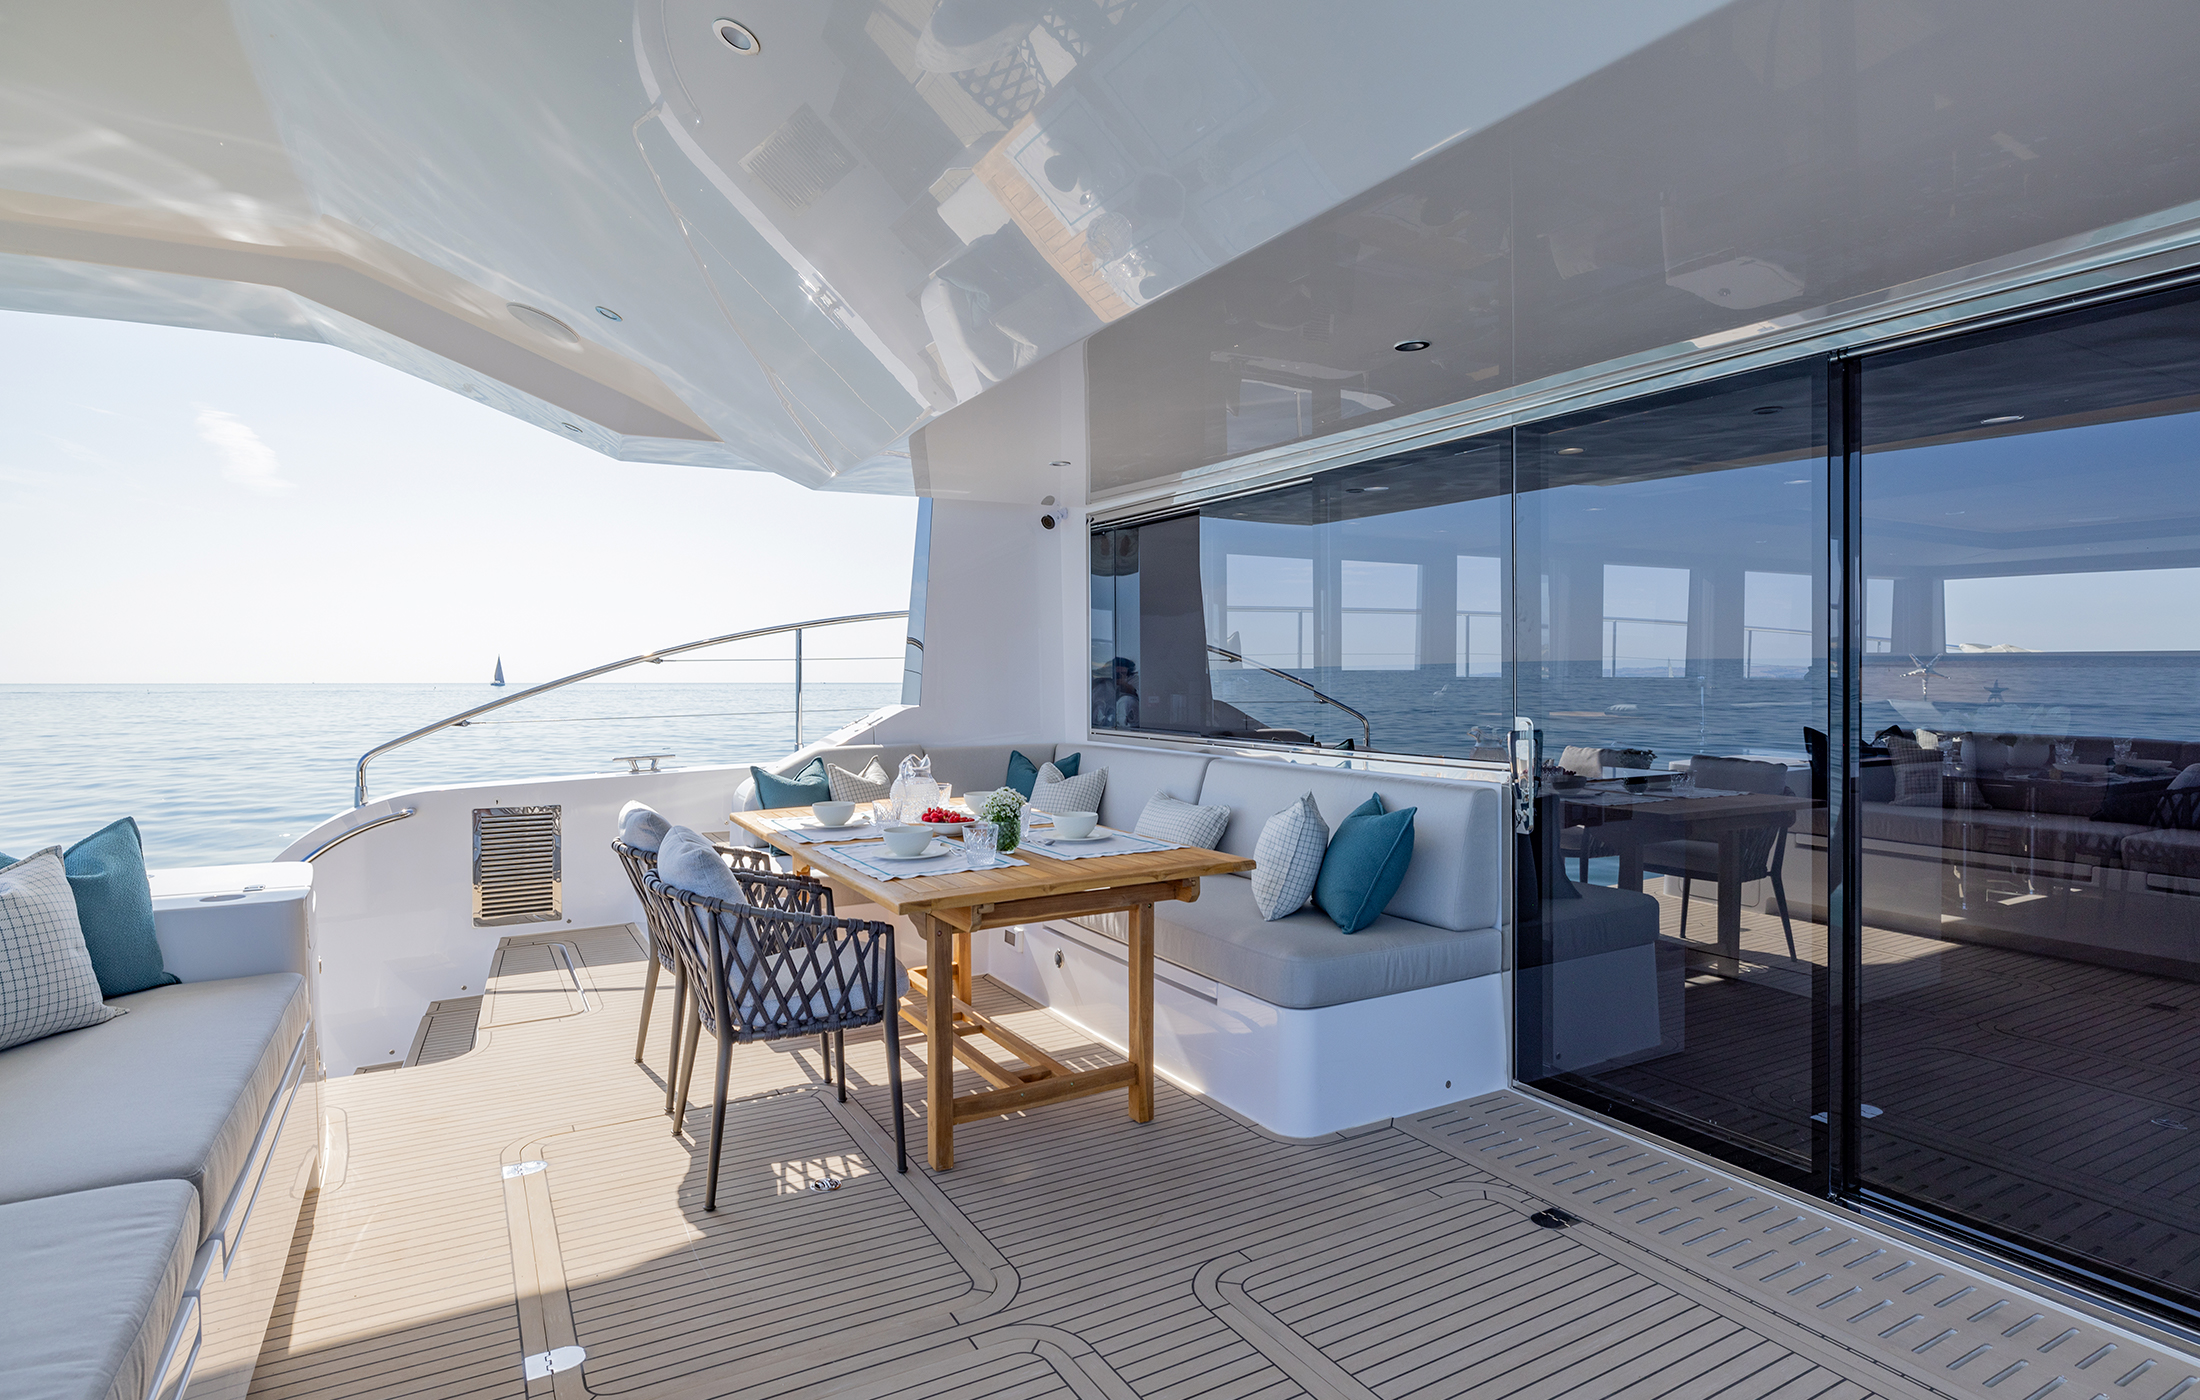 Exterior aft cockpit on the main deck of a yacht